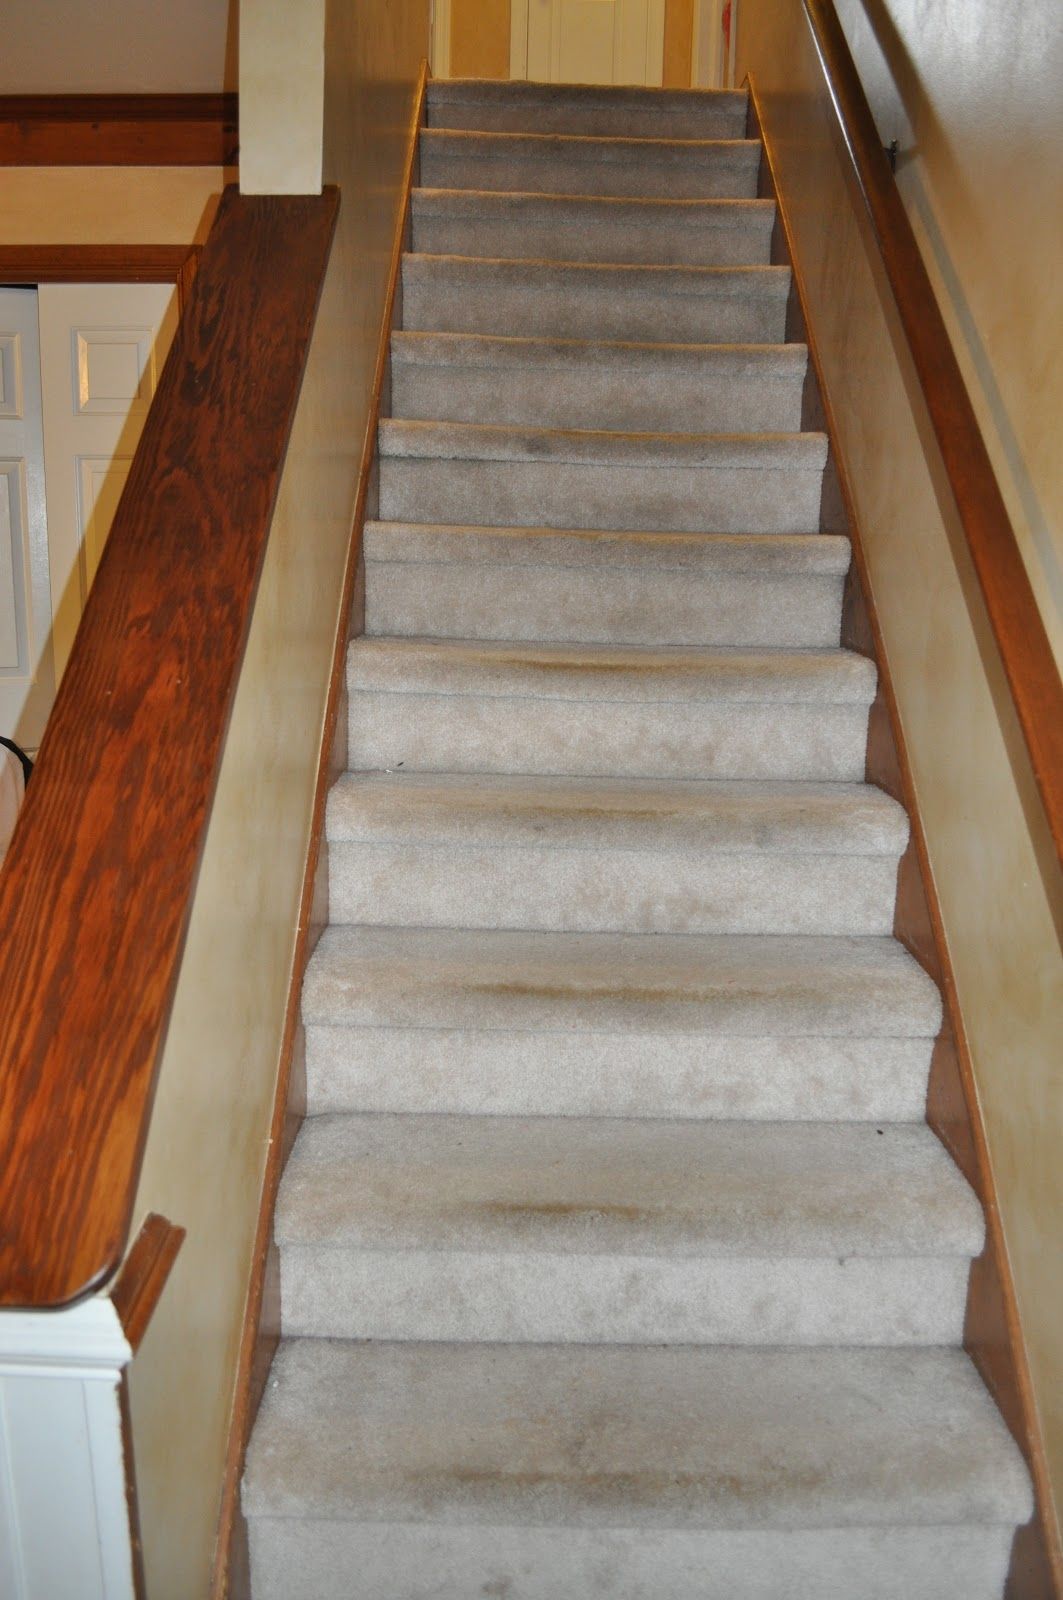 Carpet Stair Treads Make Your Own Carpet Stair Treads U2014 With Regard To Bullnose Stair Tread Rugs (View 3 of 20)